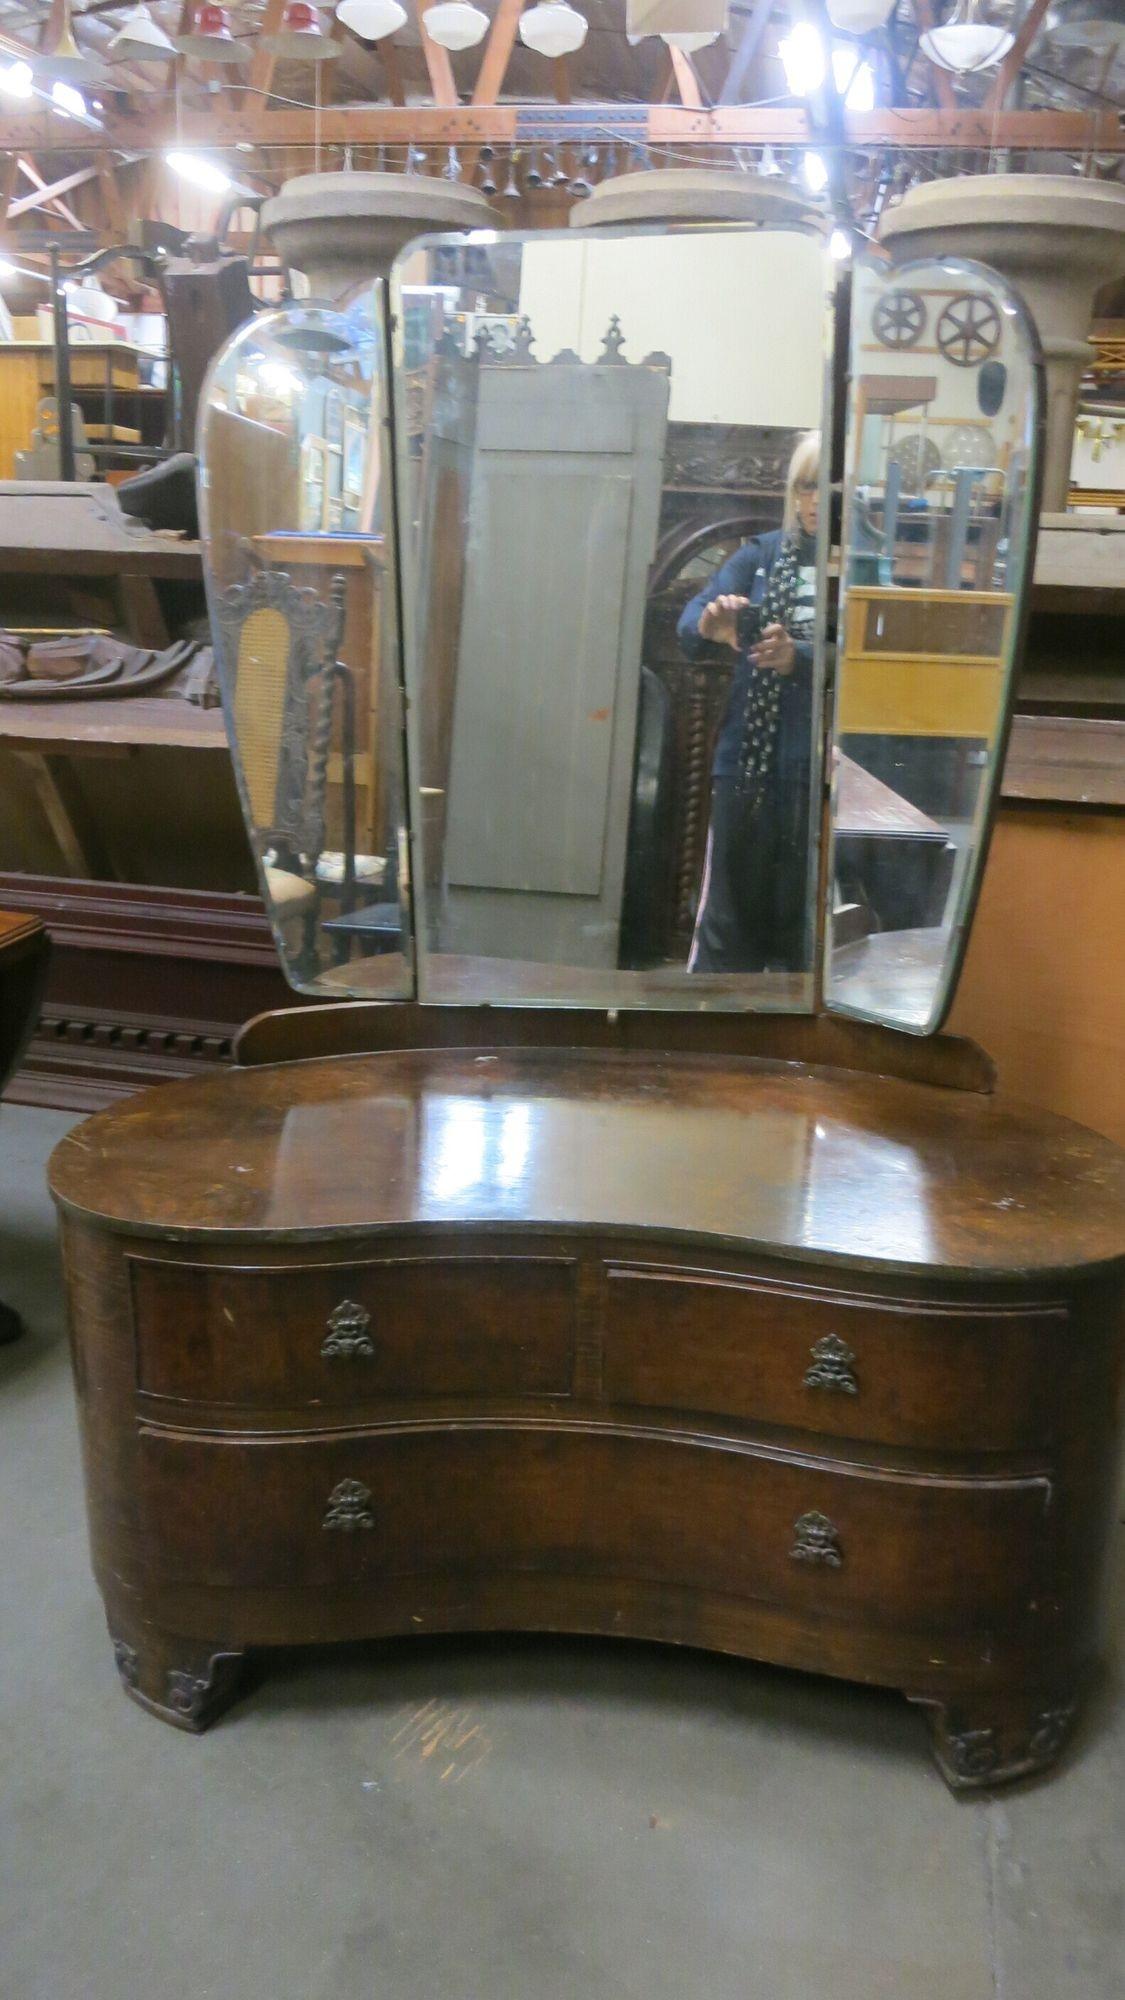 Edwardian dark-stained burlwood vanity with 3 drawers and a top trifold mirror. The vanity has a kidney shape with decorative brass pulls